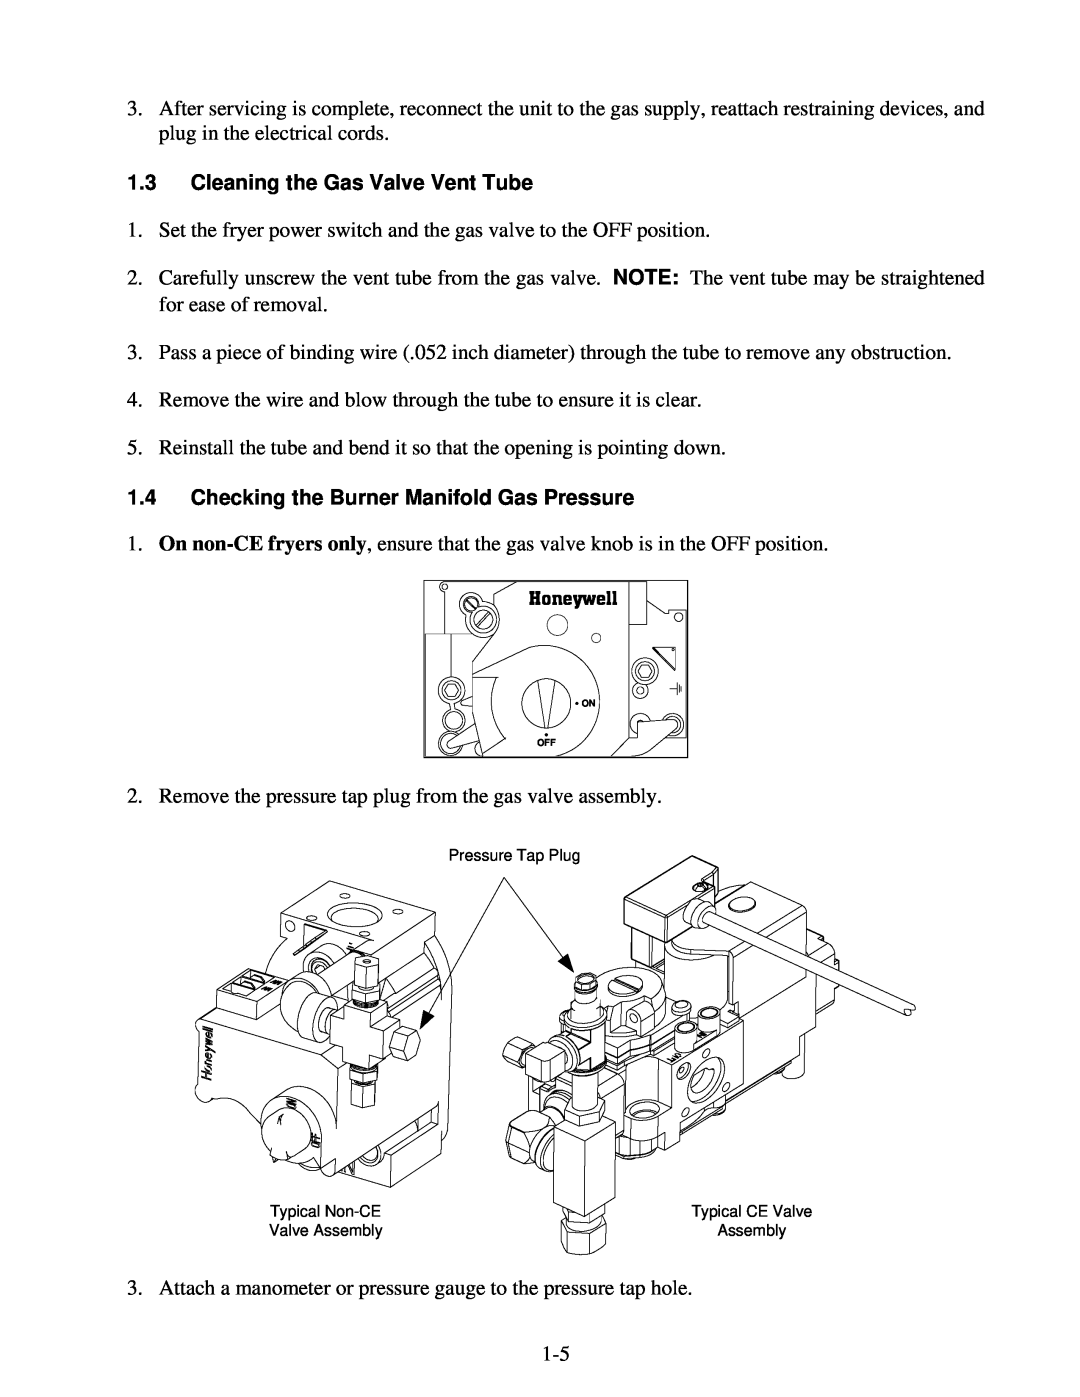 Frymaster H50 manual 1.3Cleaning the Gas Valve Vent Tube, 1.4Checking the Burner Manifold Gas Pressure 